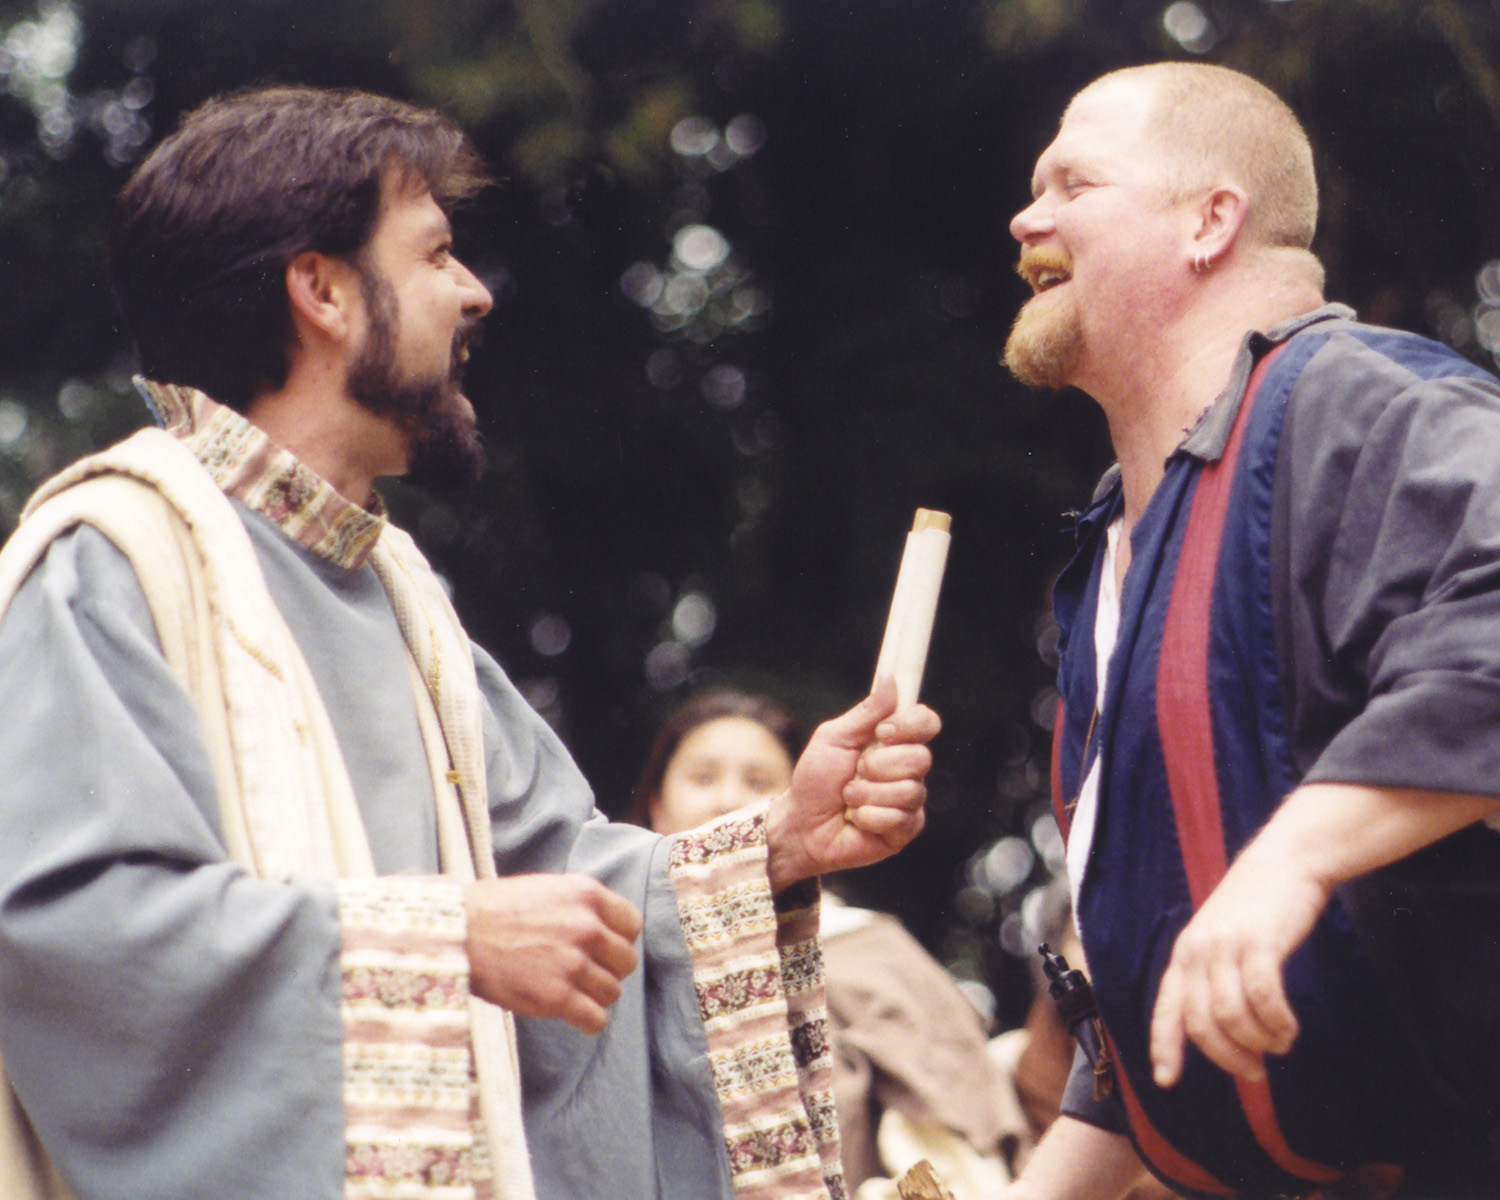 Brian Hatcher and Donn MacEllis in Henry IV, part 2